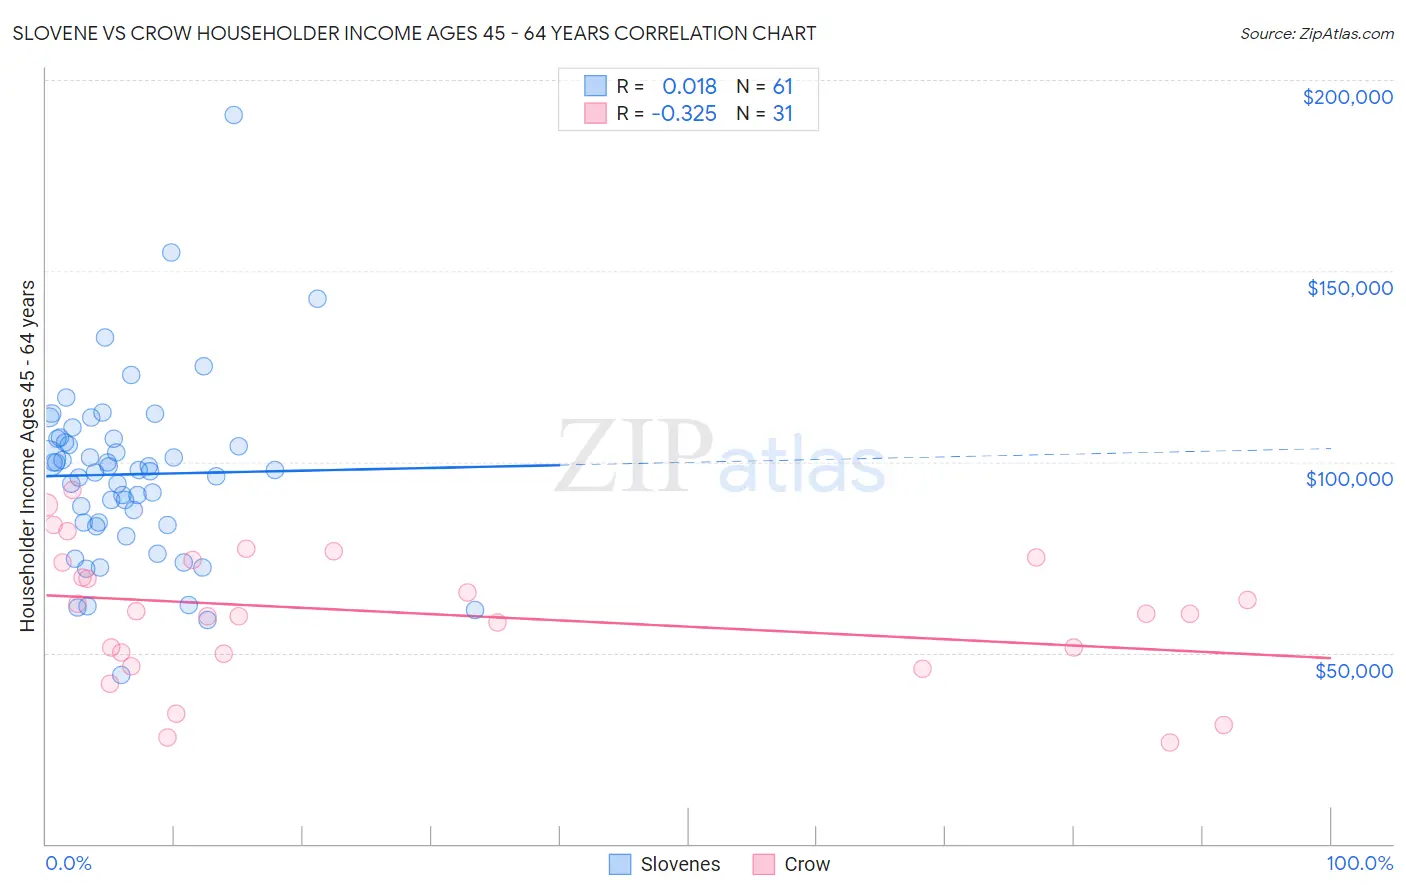 Slovene vs Crow Householder Income Ages 45 - 64 years